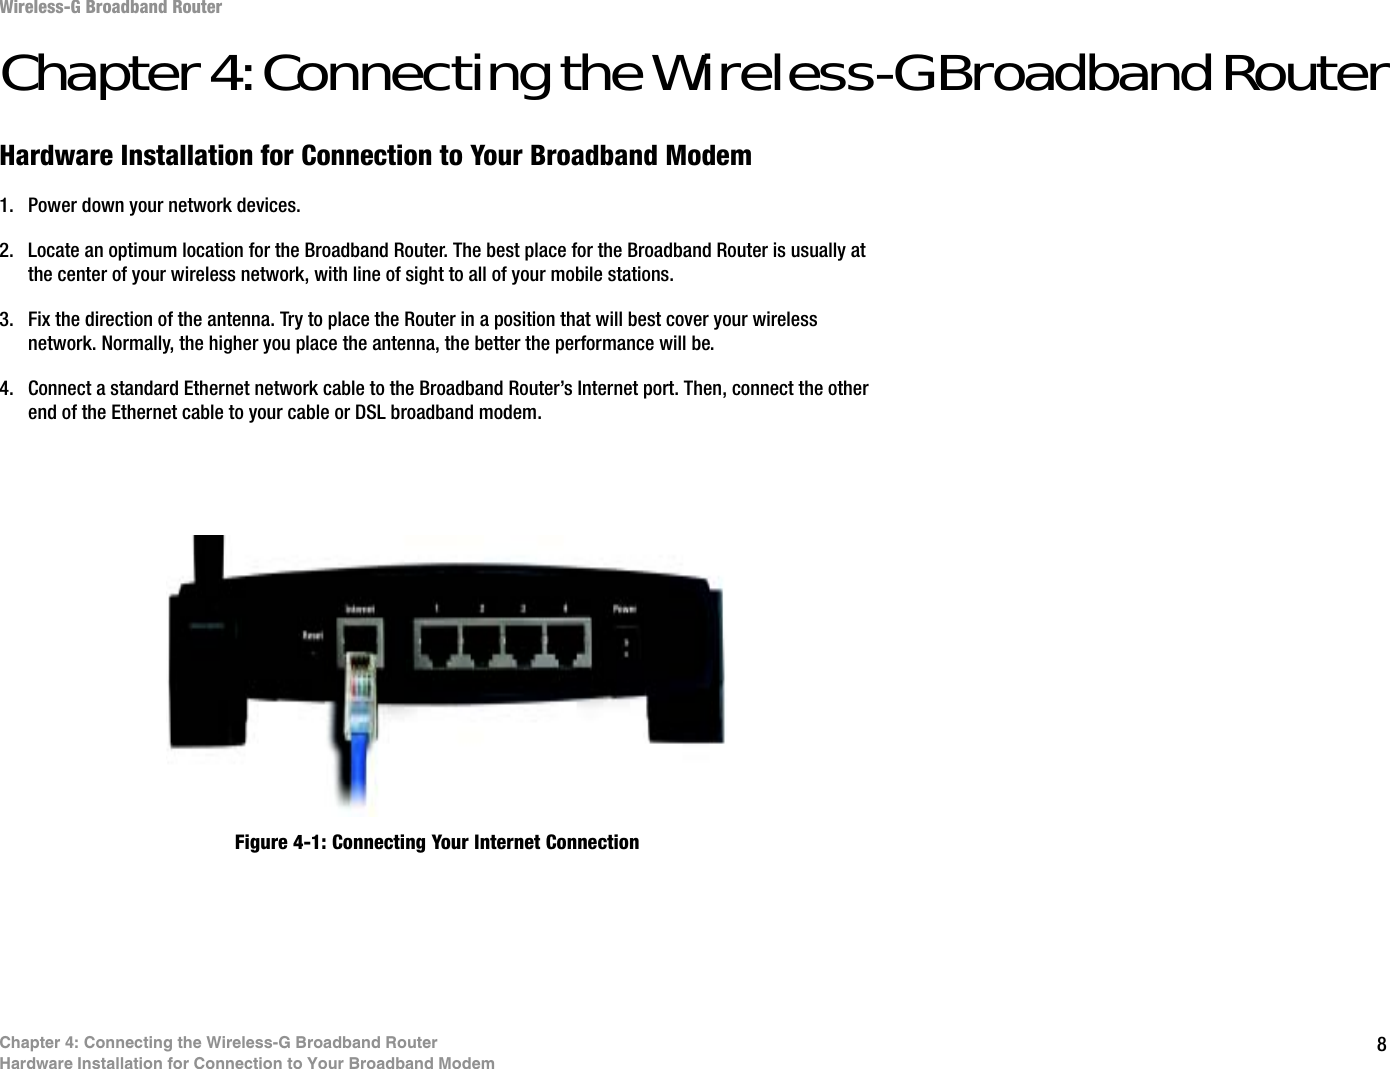 8Chapter 4: Connecting the Wireless-G Broadband RouterHardware Installation for Connection to Your Broadband ModemWireless-G Broadband RouterChapter 4: Connecting the Wireless-G Broadband RouterHardware Installation for Connection to Your Broadband Modem1. Power down your network devices.2. Locate an optimum location for the Broadband Router. The best place for the Broadband Router is usually at the center of your wireless network, with line of sight to all of your mobile stations.3. Fix the direction of the antenna. Try to place the Router in a position that will best cover your wireless network. Normally, the higher you place the antenna, the better the performance will be.4. Connect a standard Ethernet network cable to the Broadband Router’s Internet port. Then, connect the other end of the Ethernet cable to your cable or DSL broadband modem.Figure 4-1: Connecting Your Internet Connection